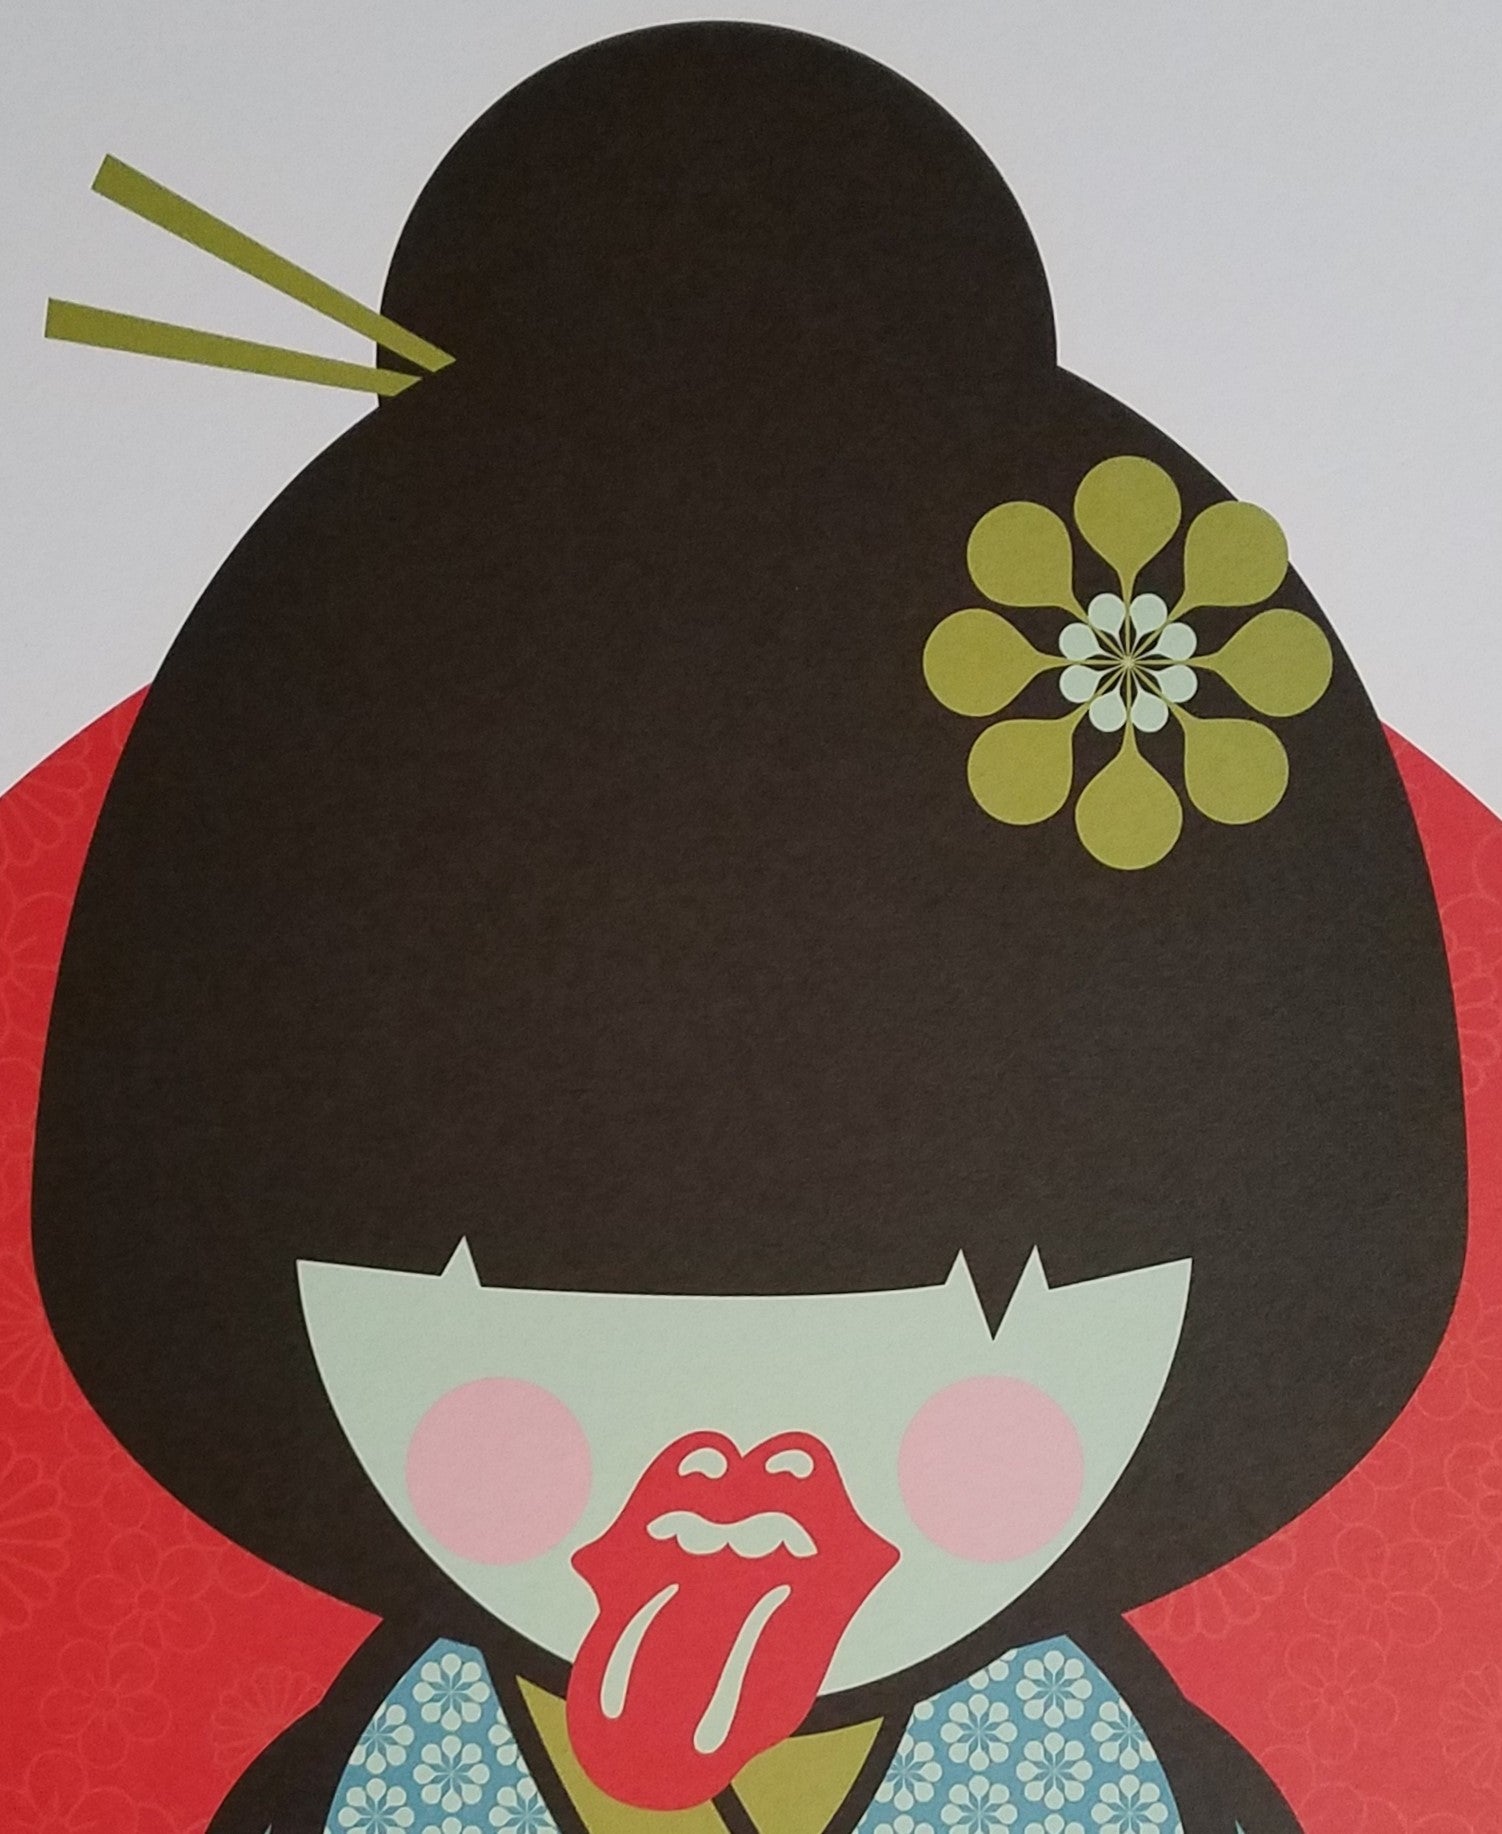 Title: Rolling Stones   Poster artist:   Edition:  xx/500  Type: Lithograph   Size: 17" x 23"  Location: Tokyo, Japan   Venue: Tokyo Dome   Notes:  1st edition, official poster hand numbered and embossed.  Official poster, Asia 14 On Fire Tour original from the show!